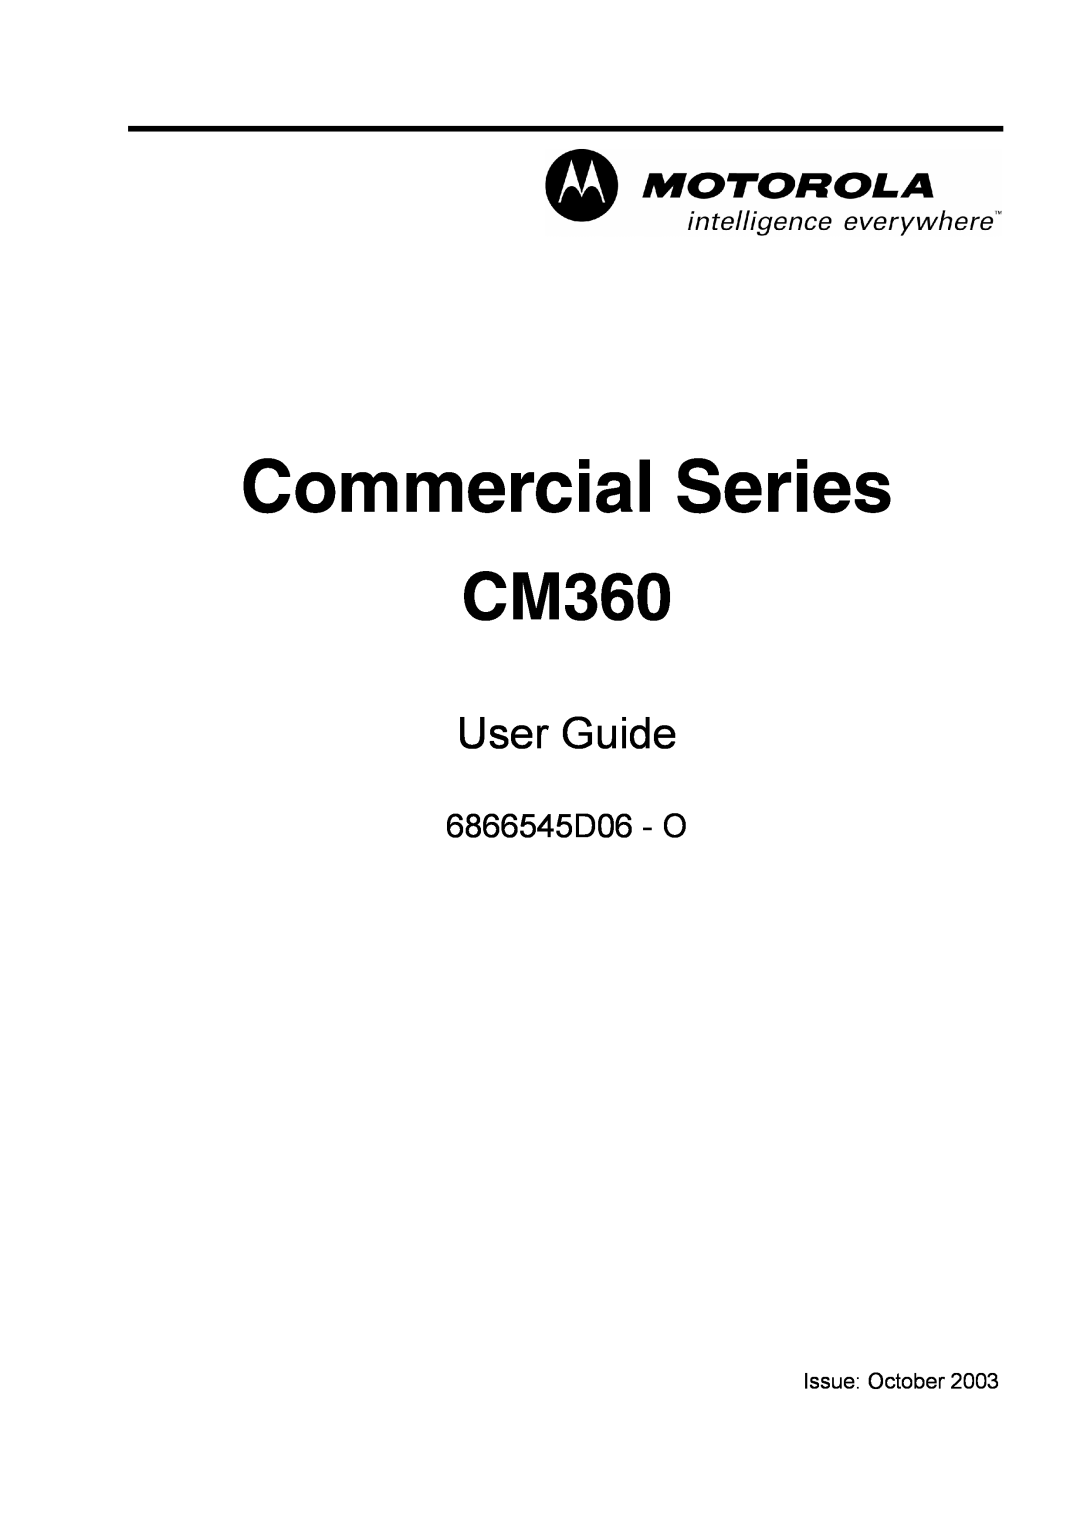 Motorola CM360 manual Issue October, Commercial Series, User Guide, 6866545D06 - O 